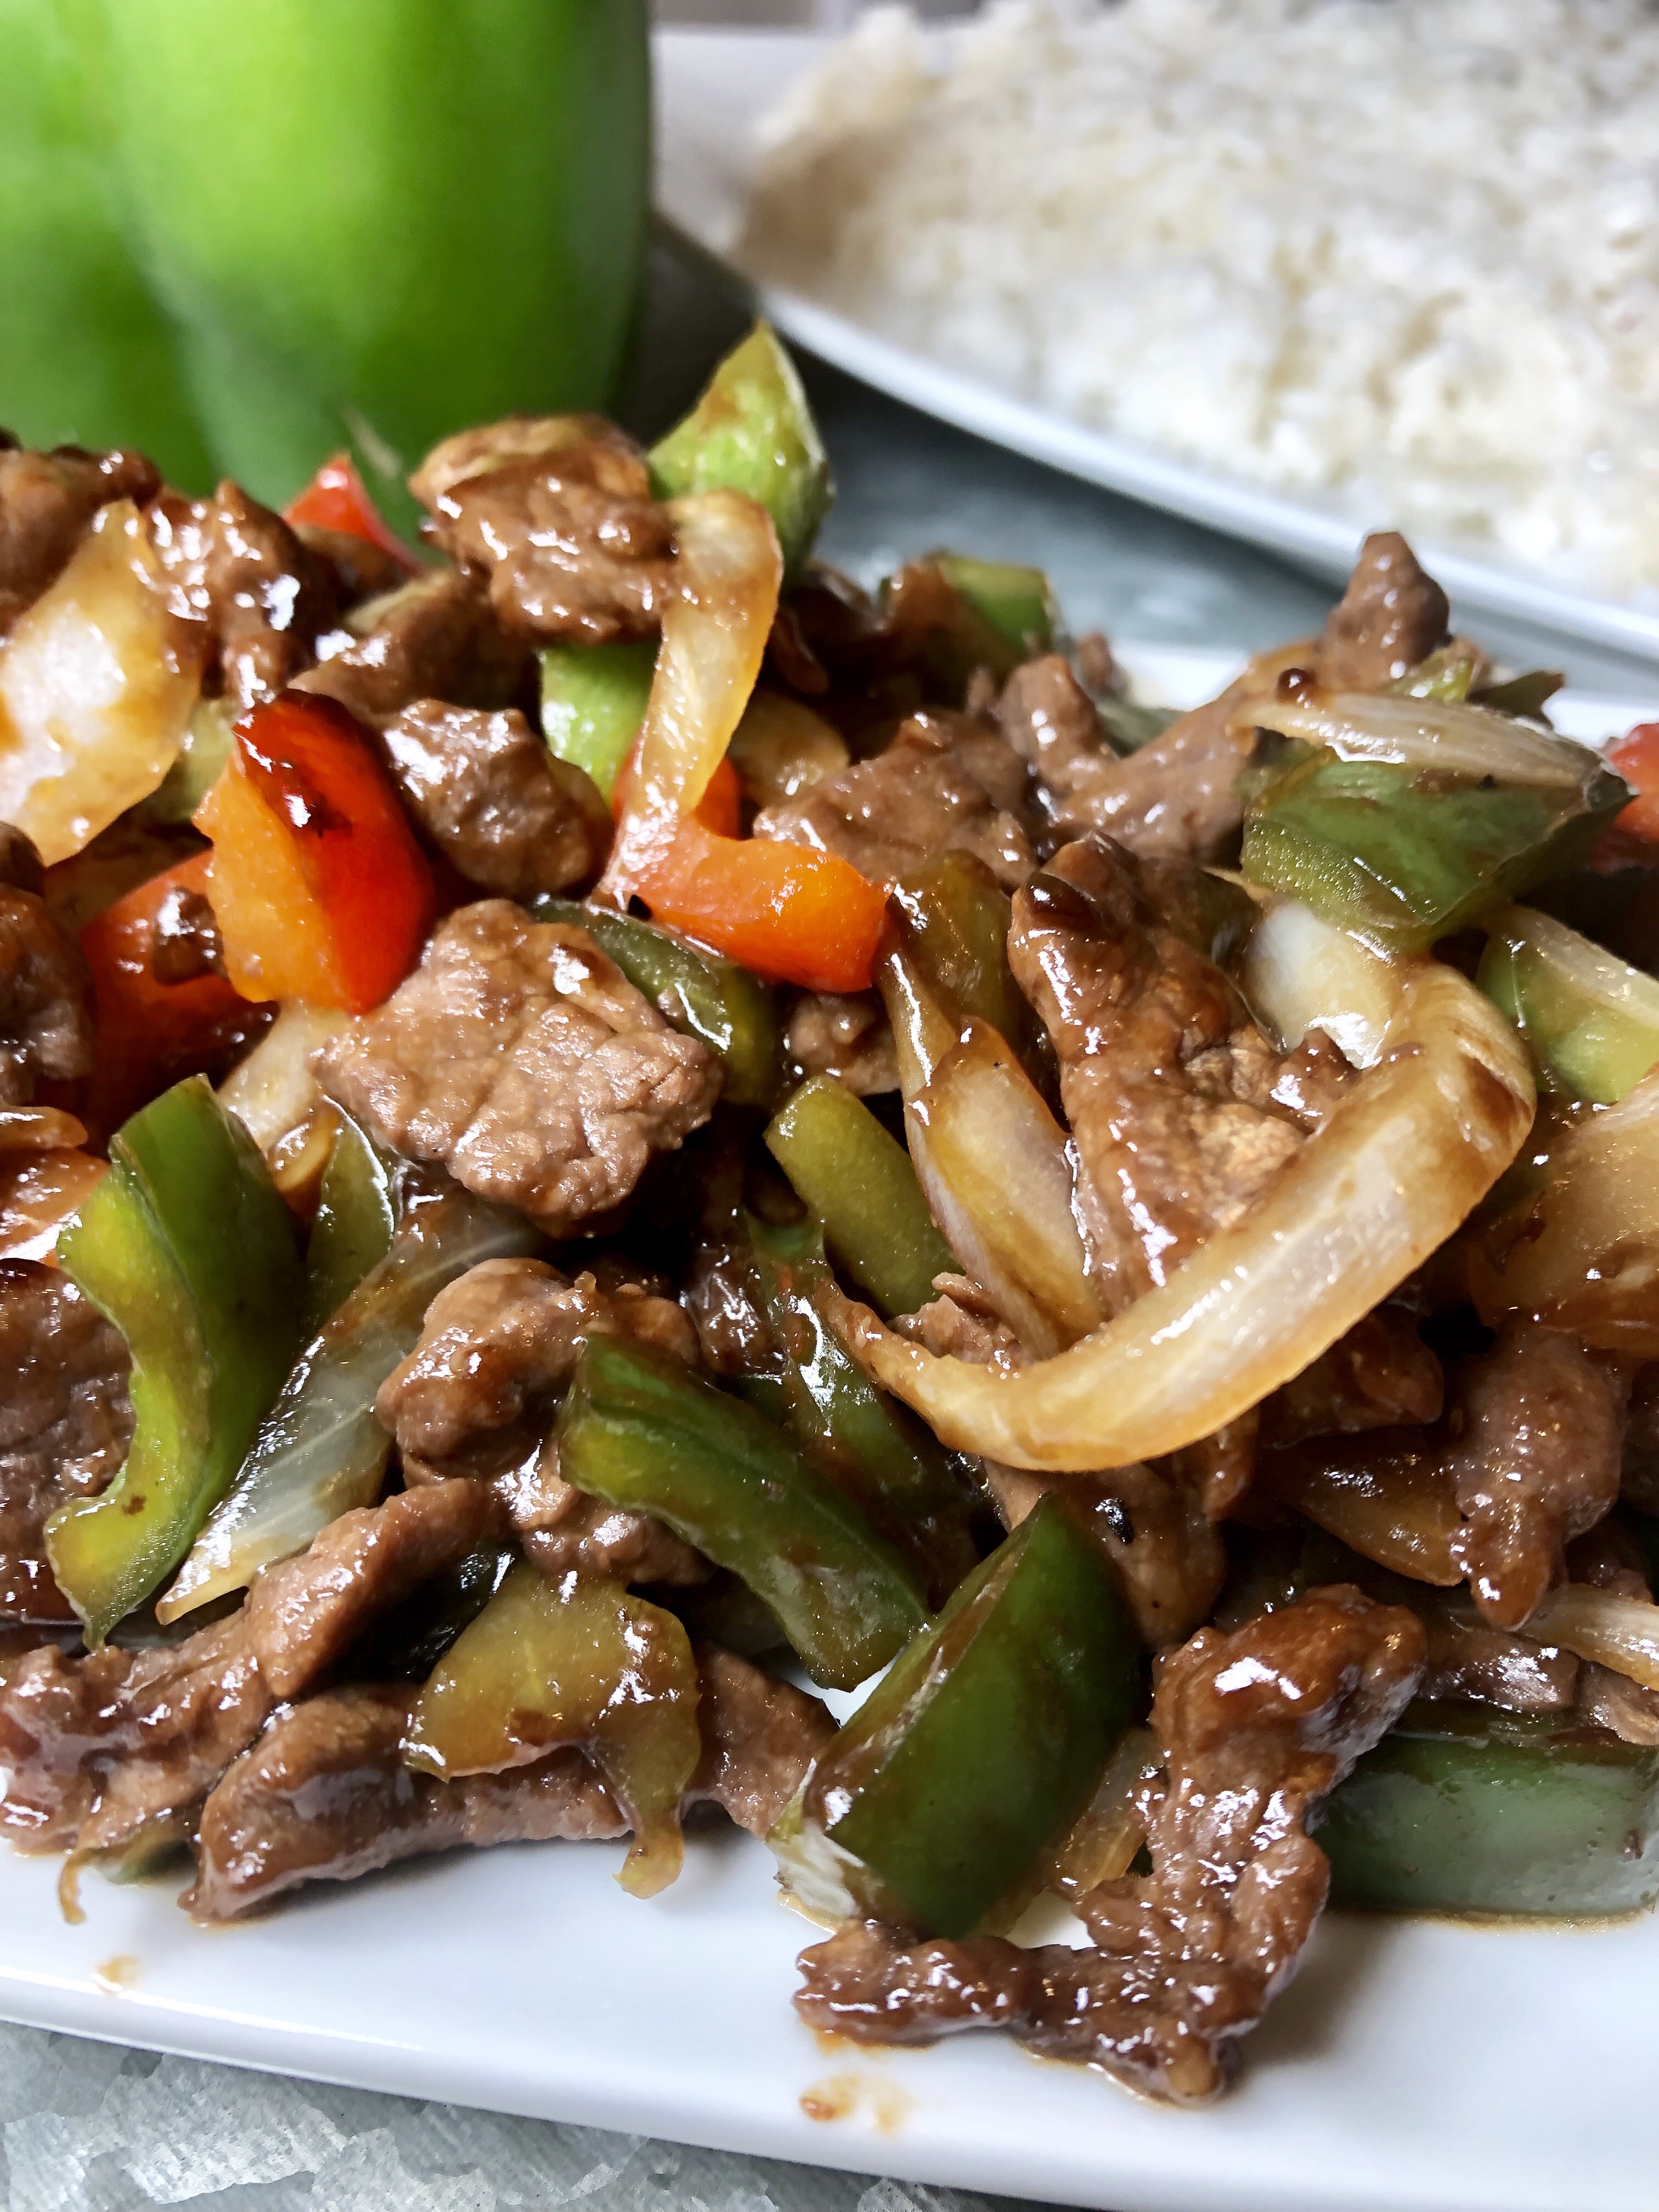 pepper steak with onion